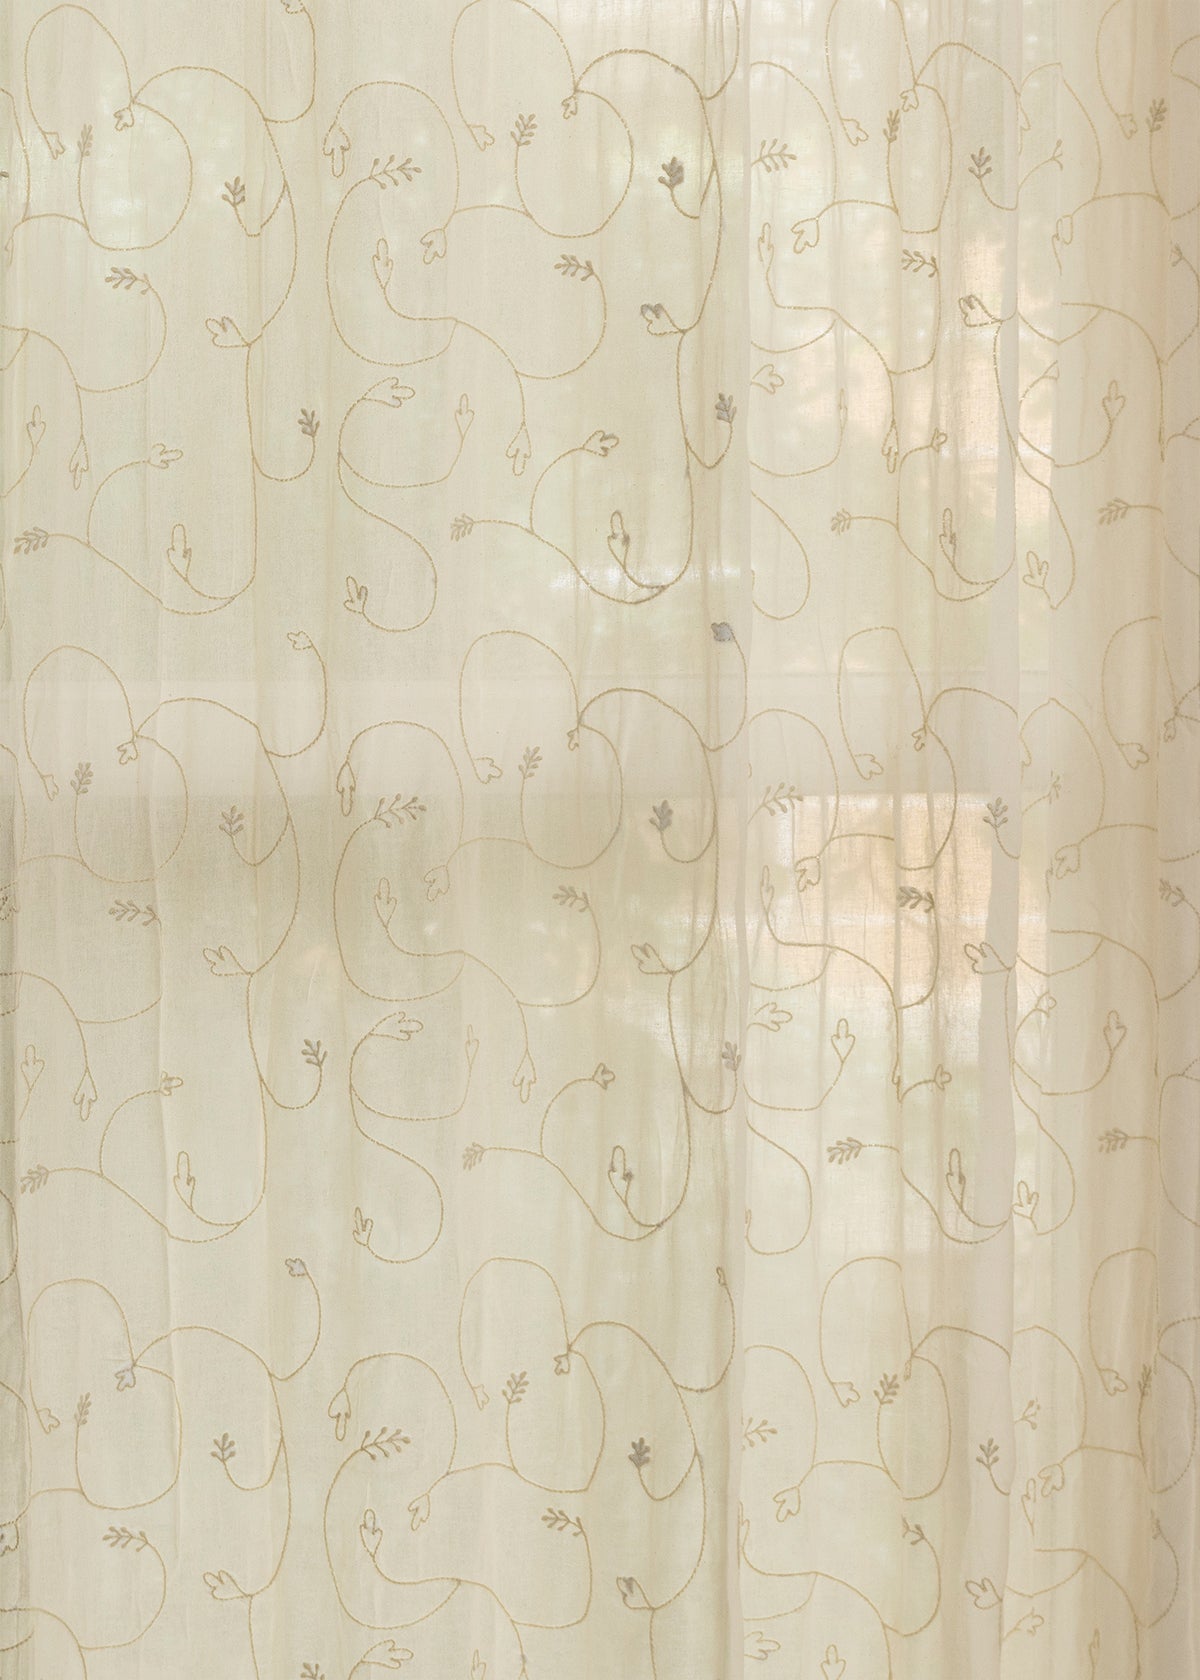 Ivy Vines 100% Customizable Cotton sheer embroidered minimal curtain for living room -  Light filtering - Cream